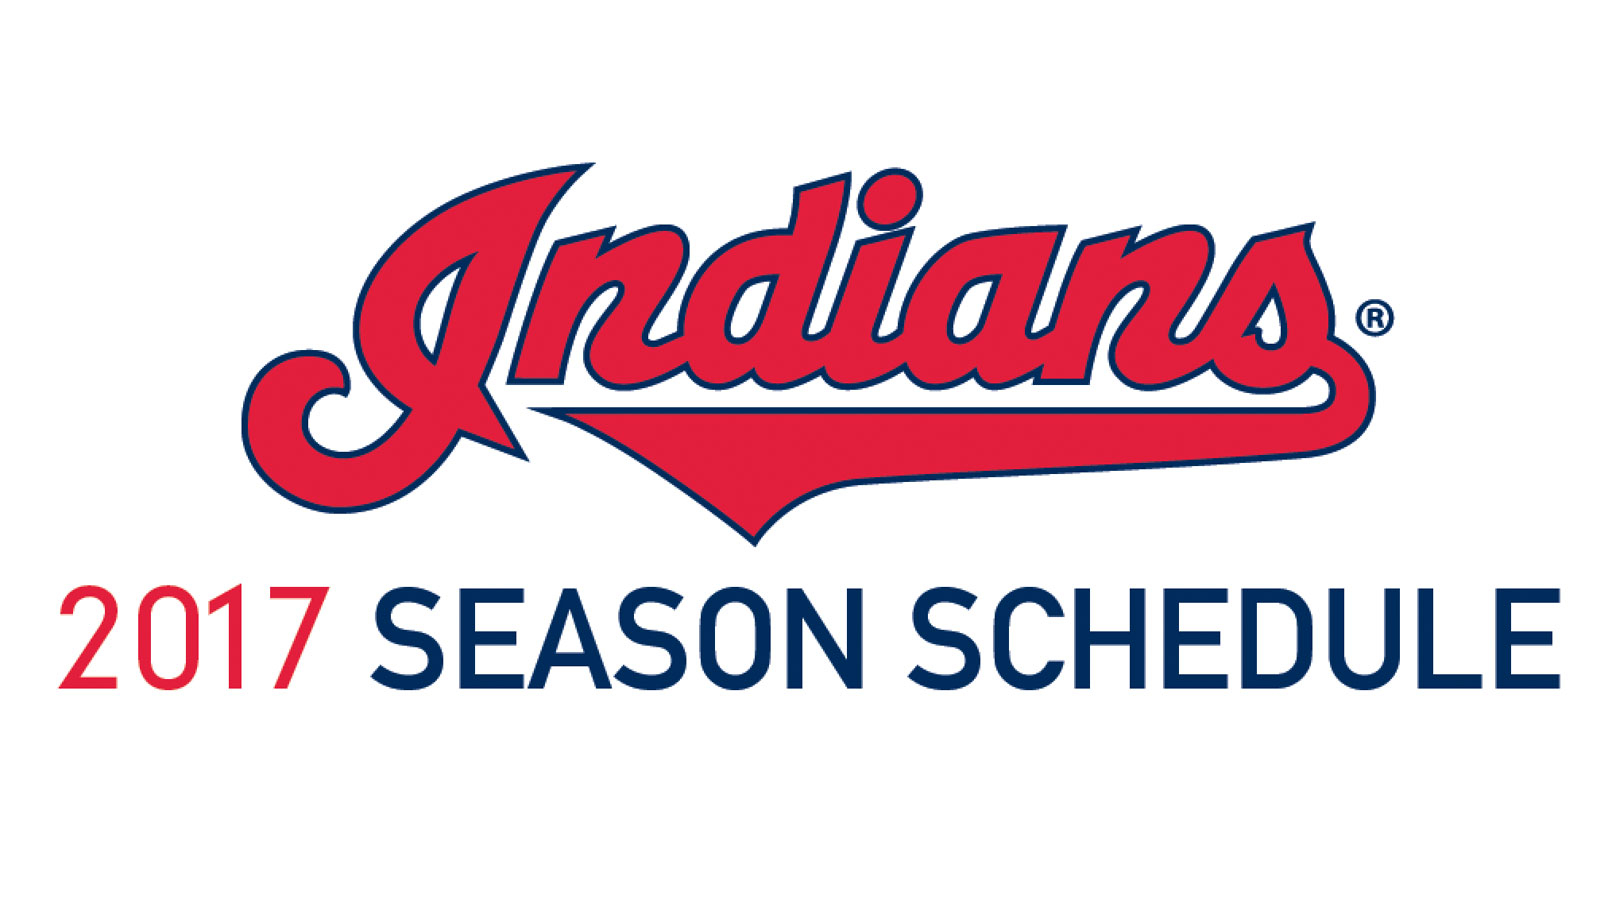 Obsessed Cleveland Indians Printable Schedule Obrien s 